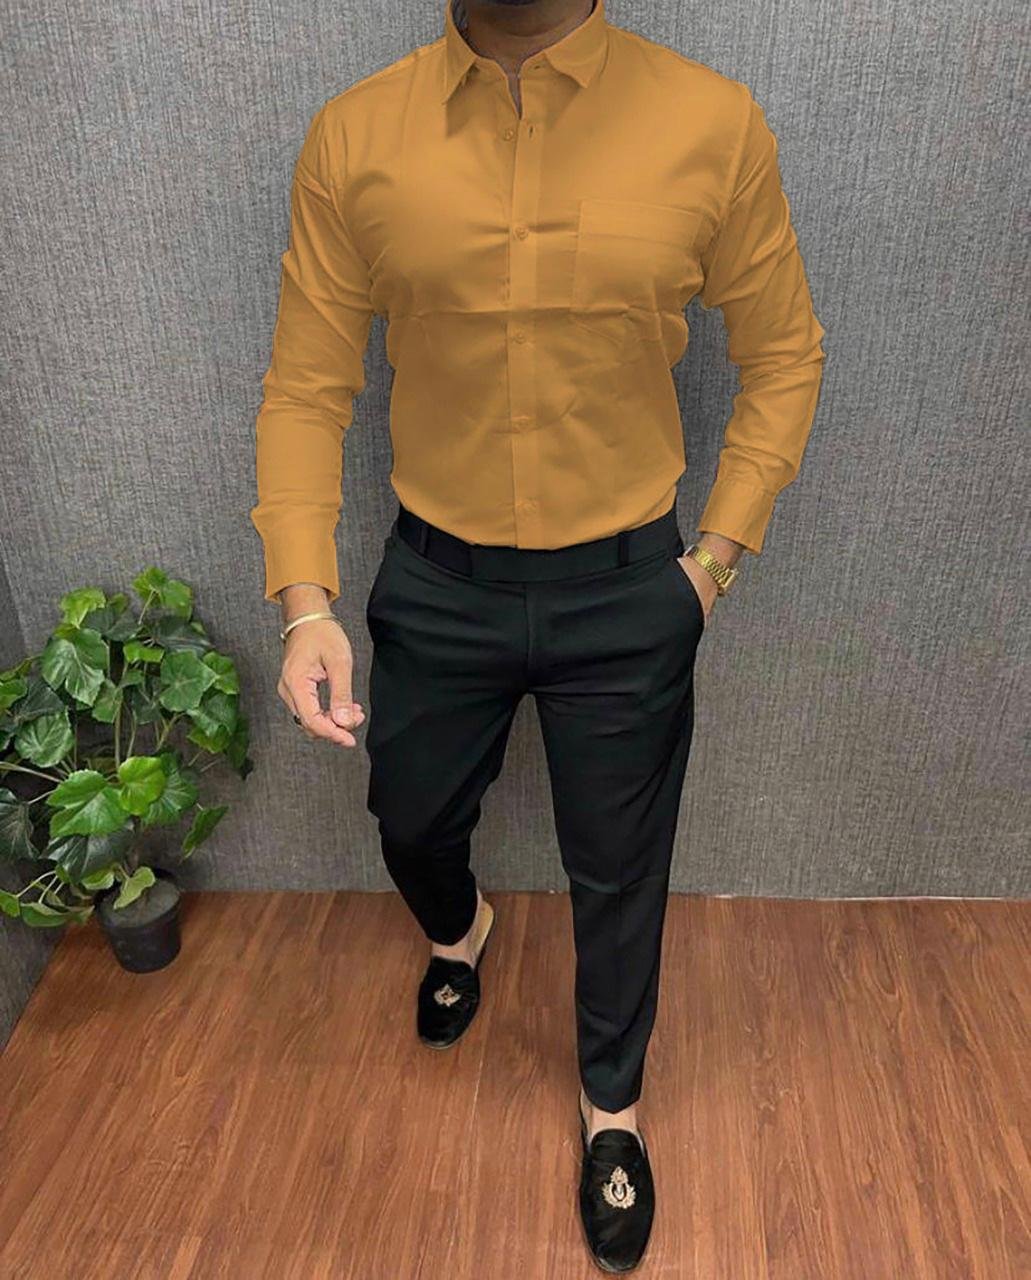 100% Cotton Mustard Printed Polo Neck Half Sleeve Casual T-Shirt